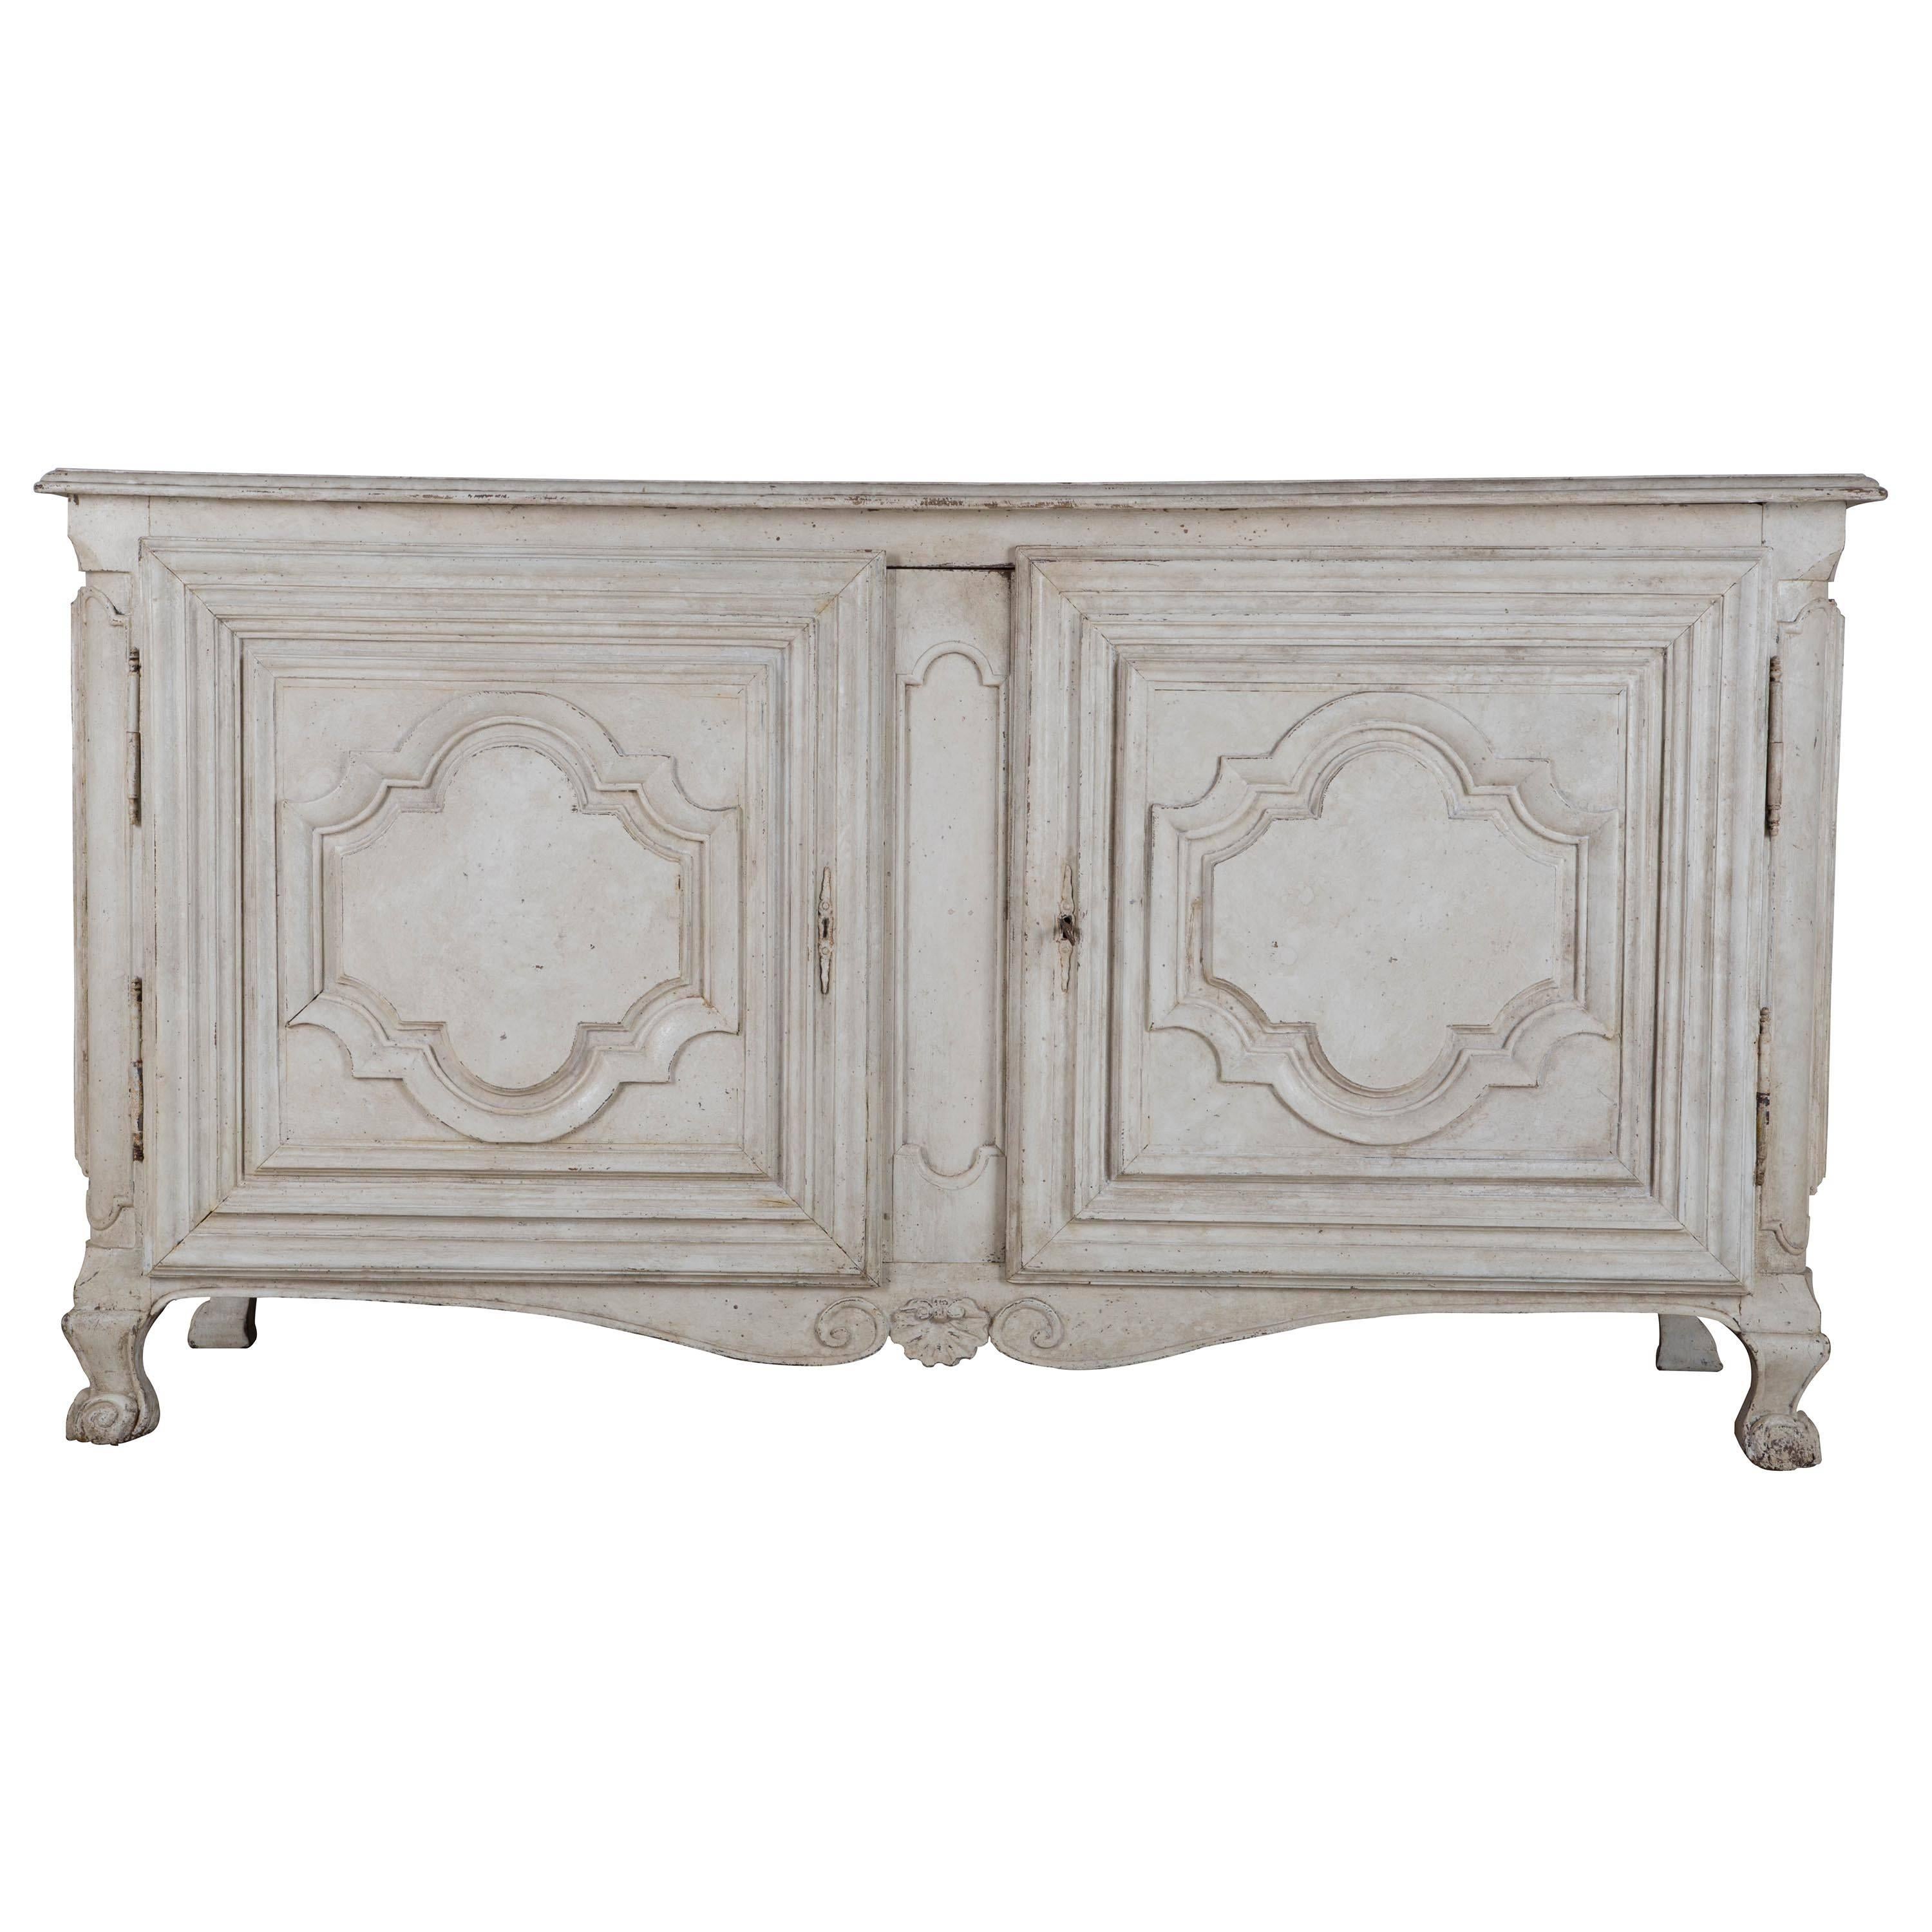 Late 18th Century Painted French Buffet